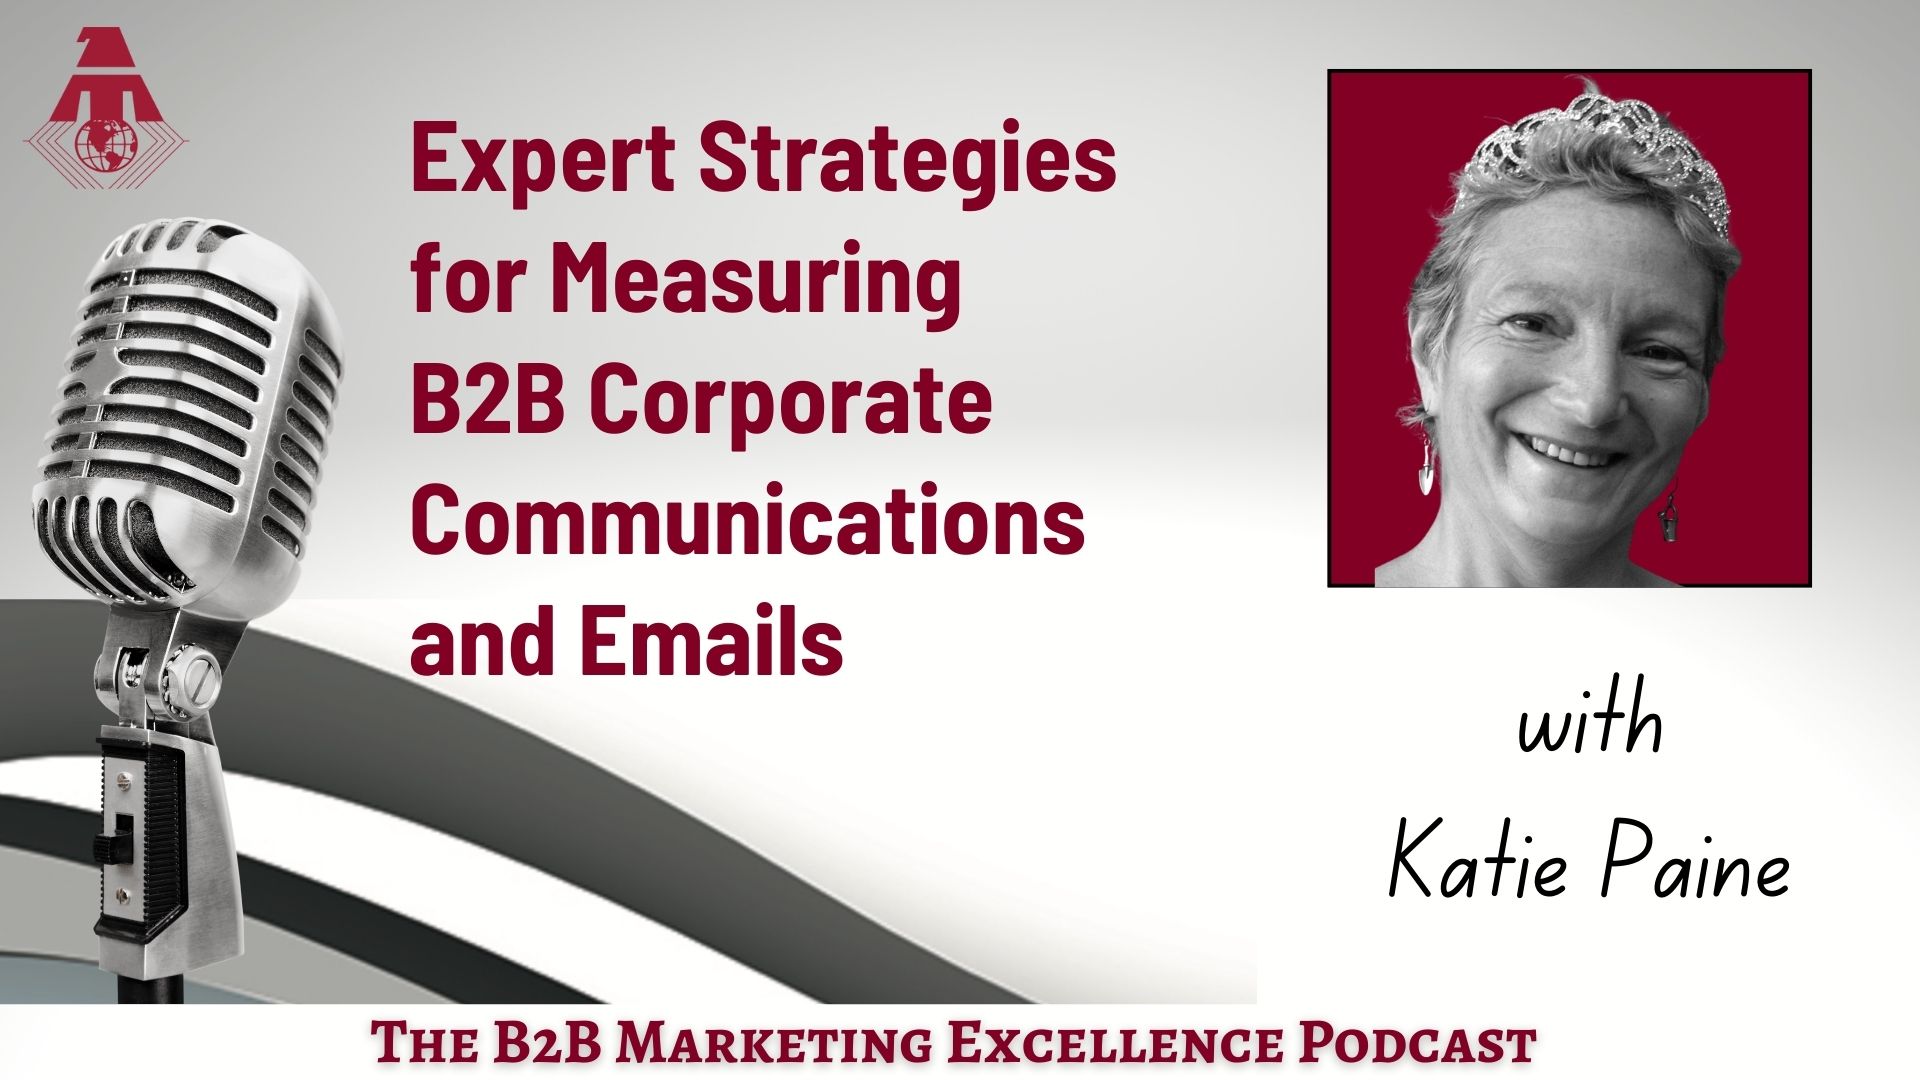 Podcast – Expert Strategies for Measuring B2B Corporate Communications and Emails